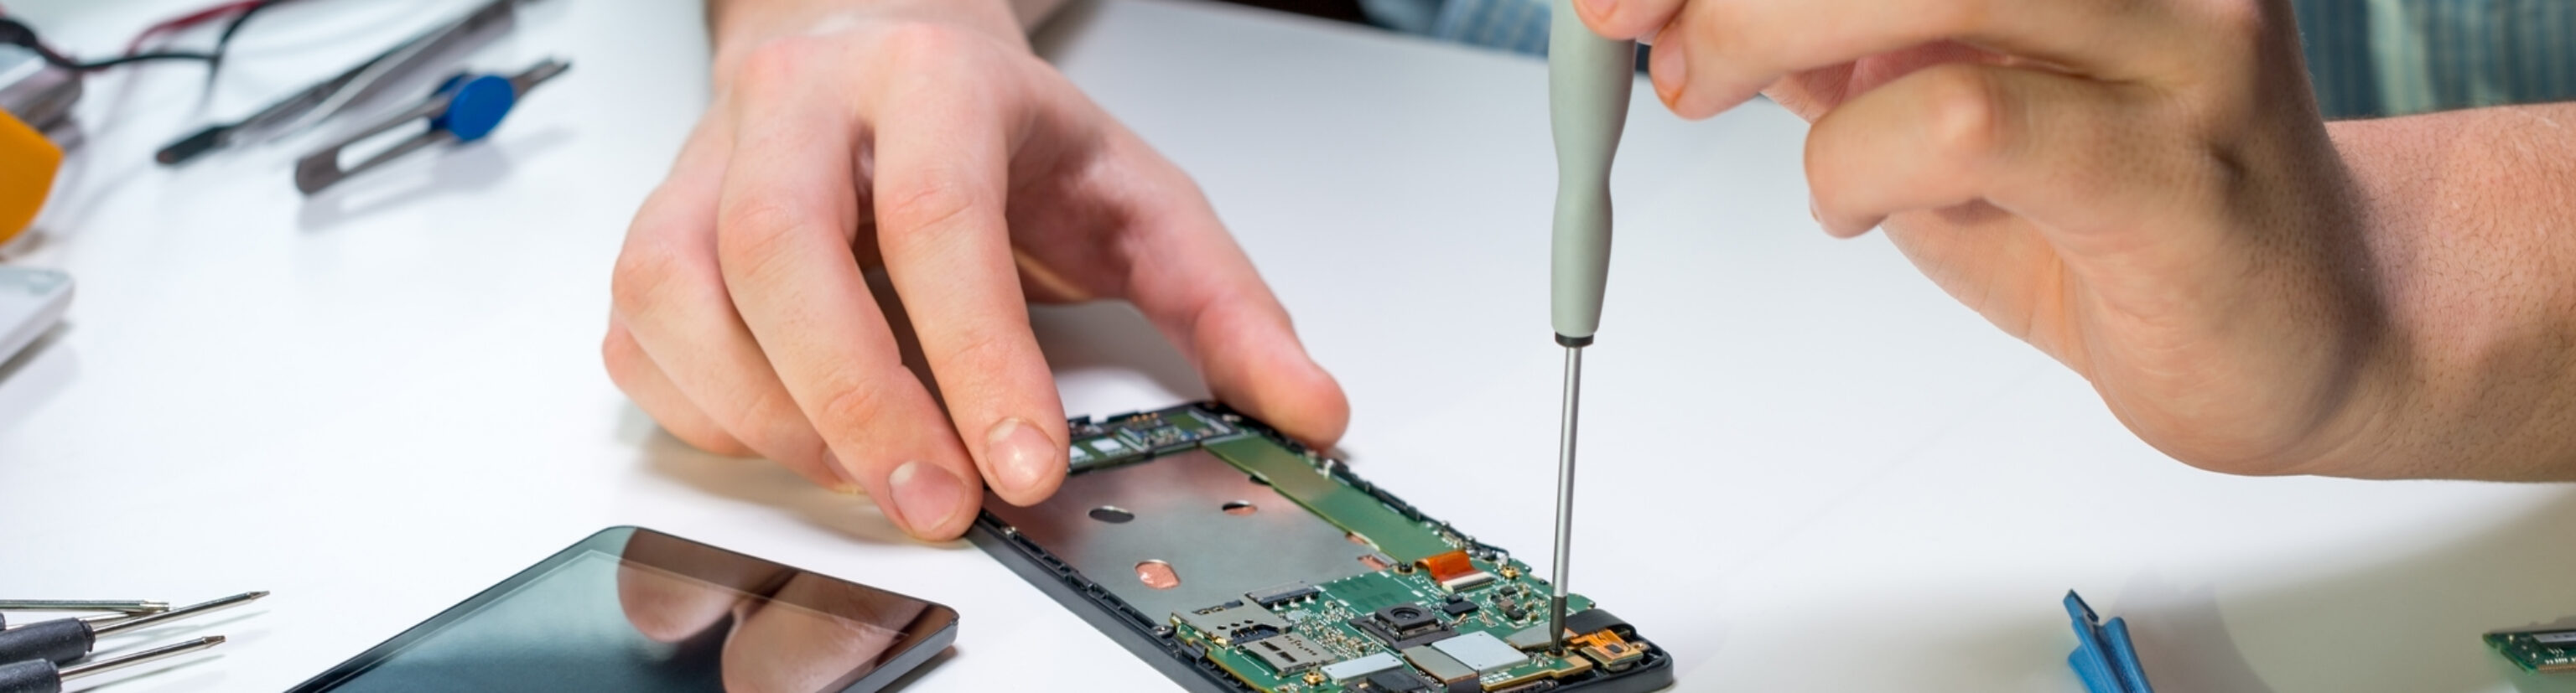 A person repairing a smartphone—an important element of sustainable technology